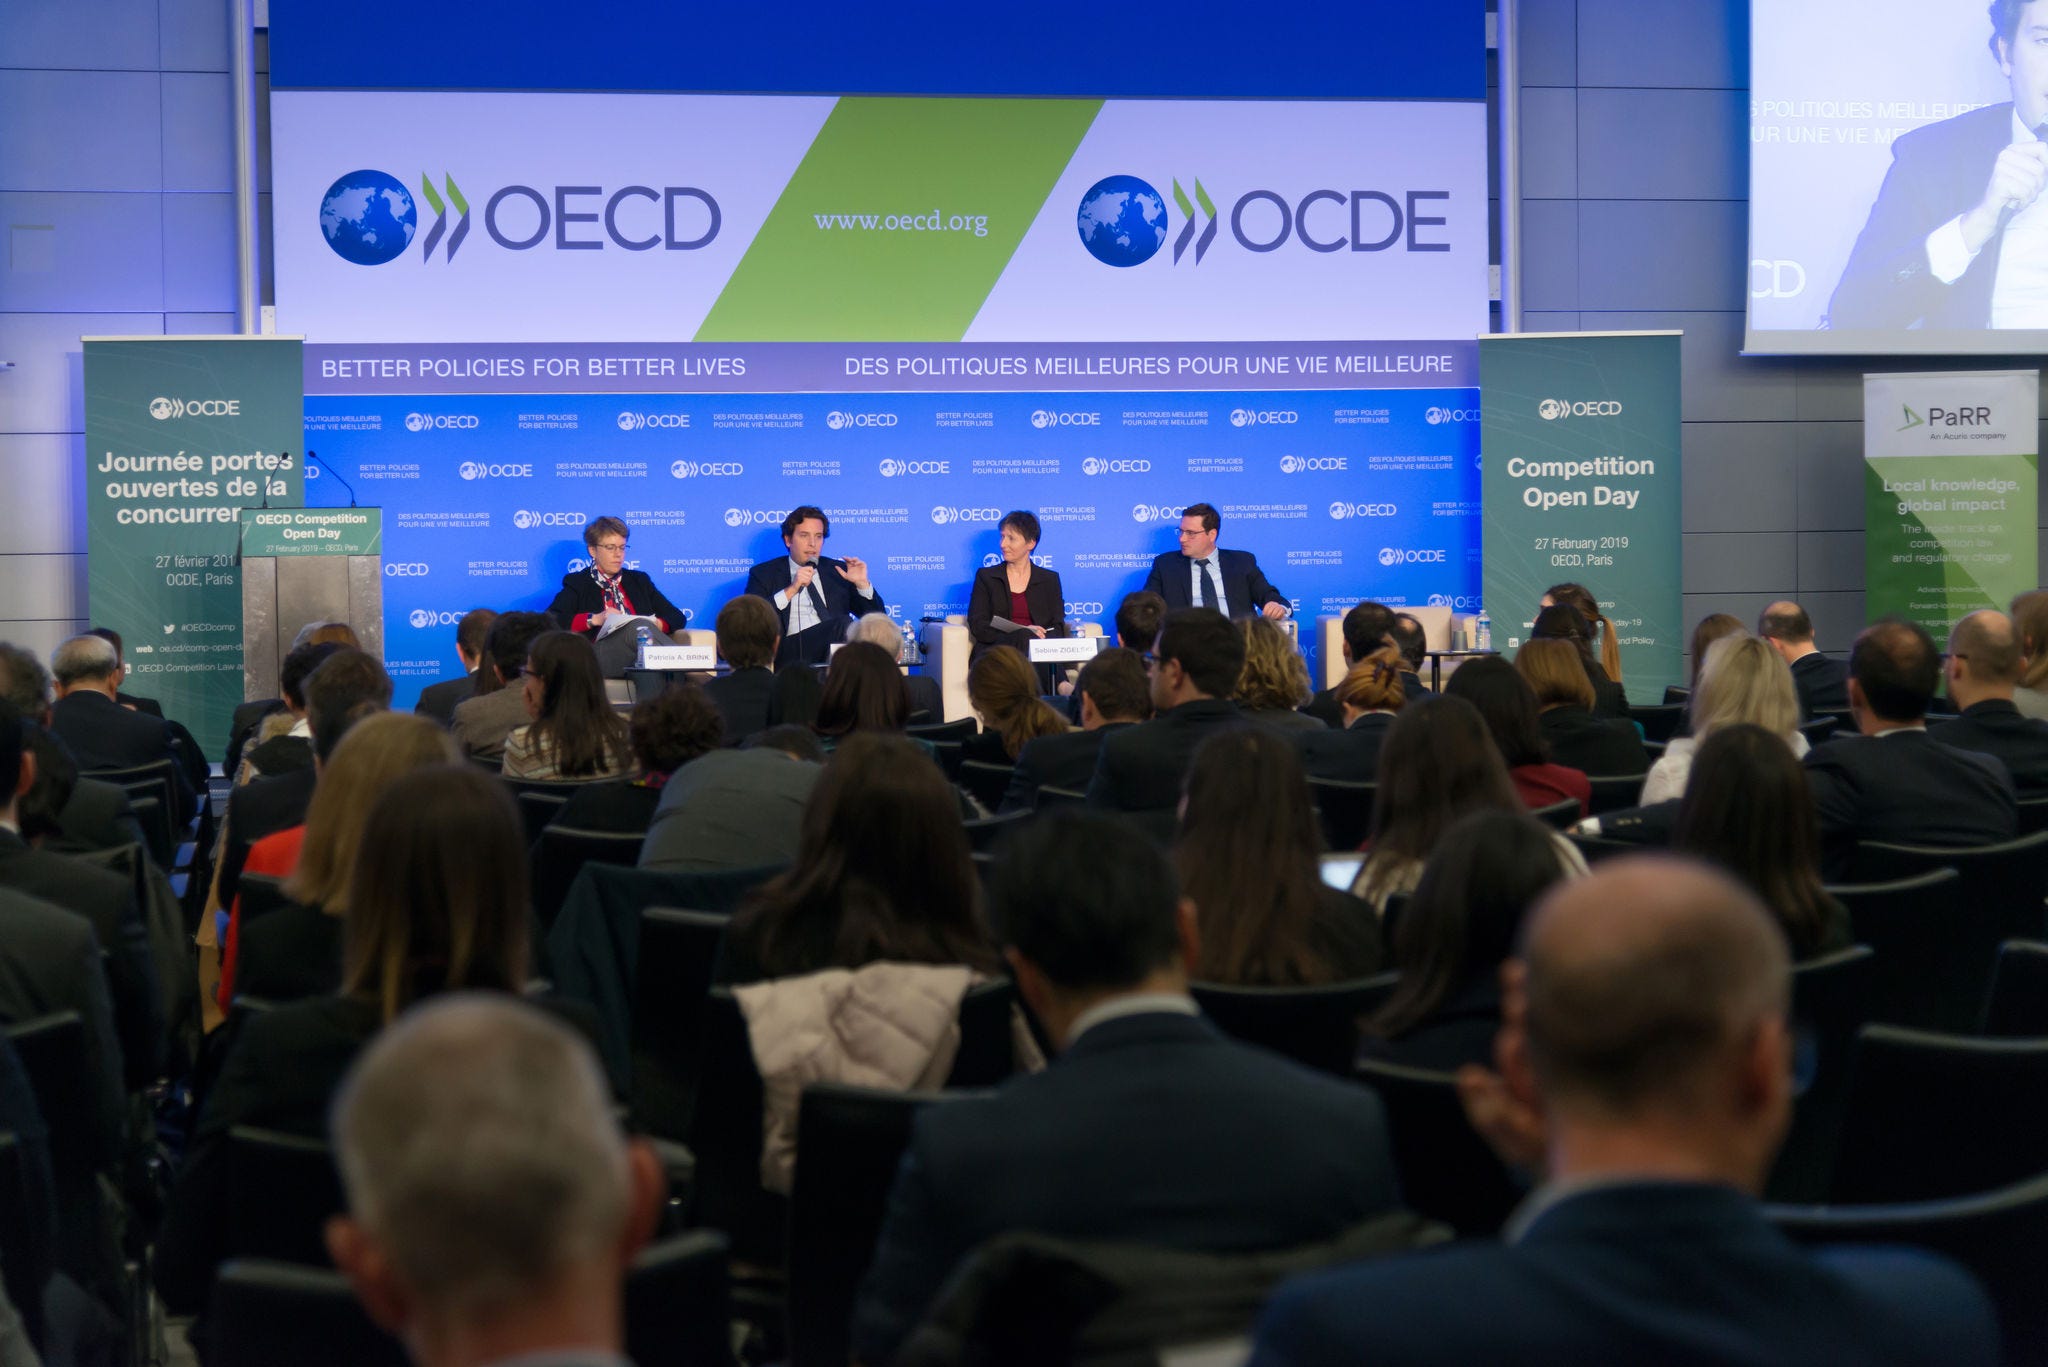 27 February 2019 - OECD-Competition Open-Day at OECD Headquarter, Paris, France

Photo: OECD/Christian Moutarde
